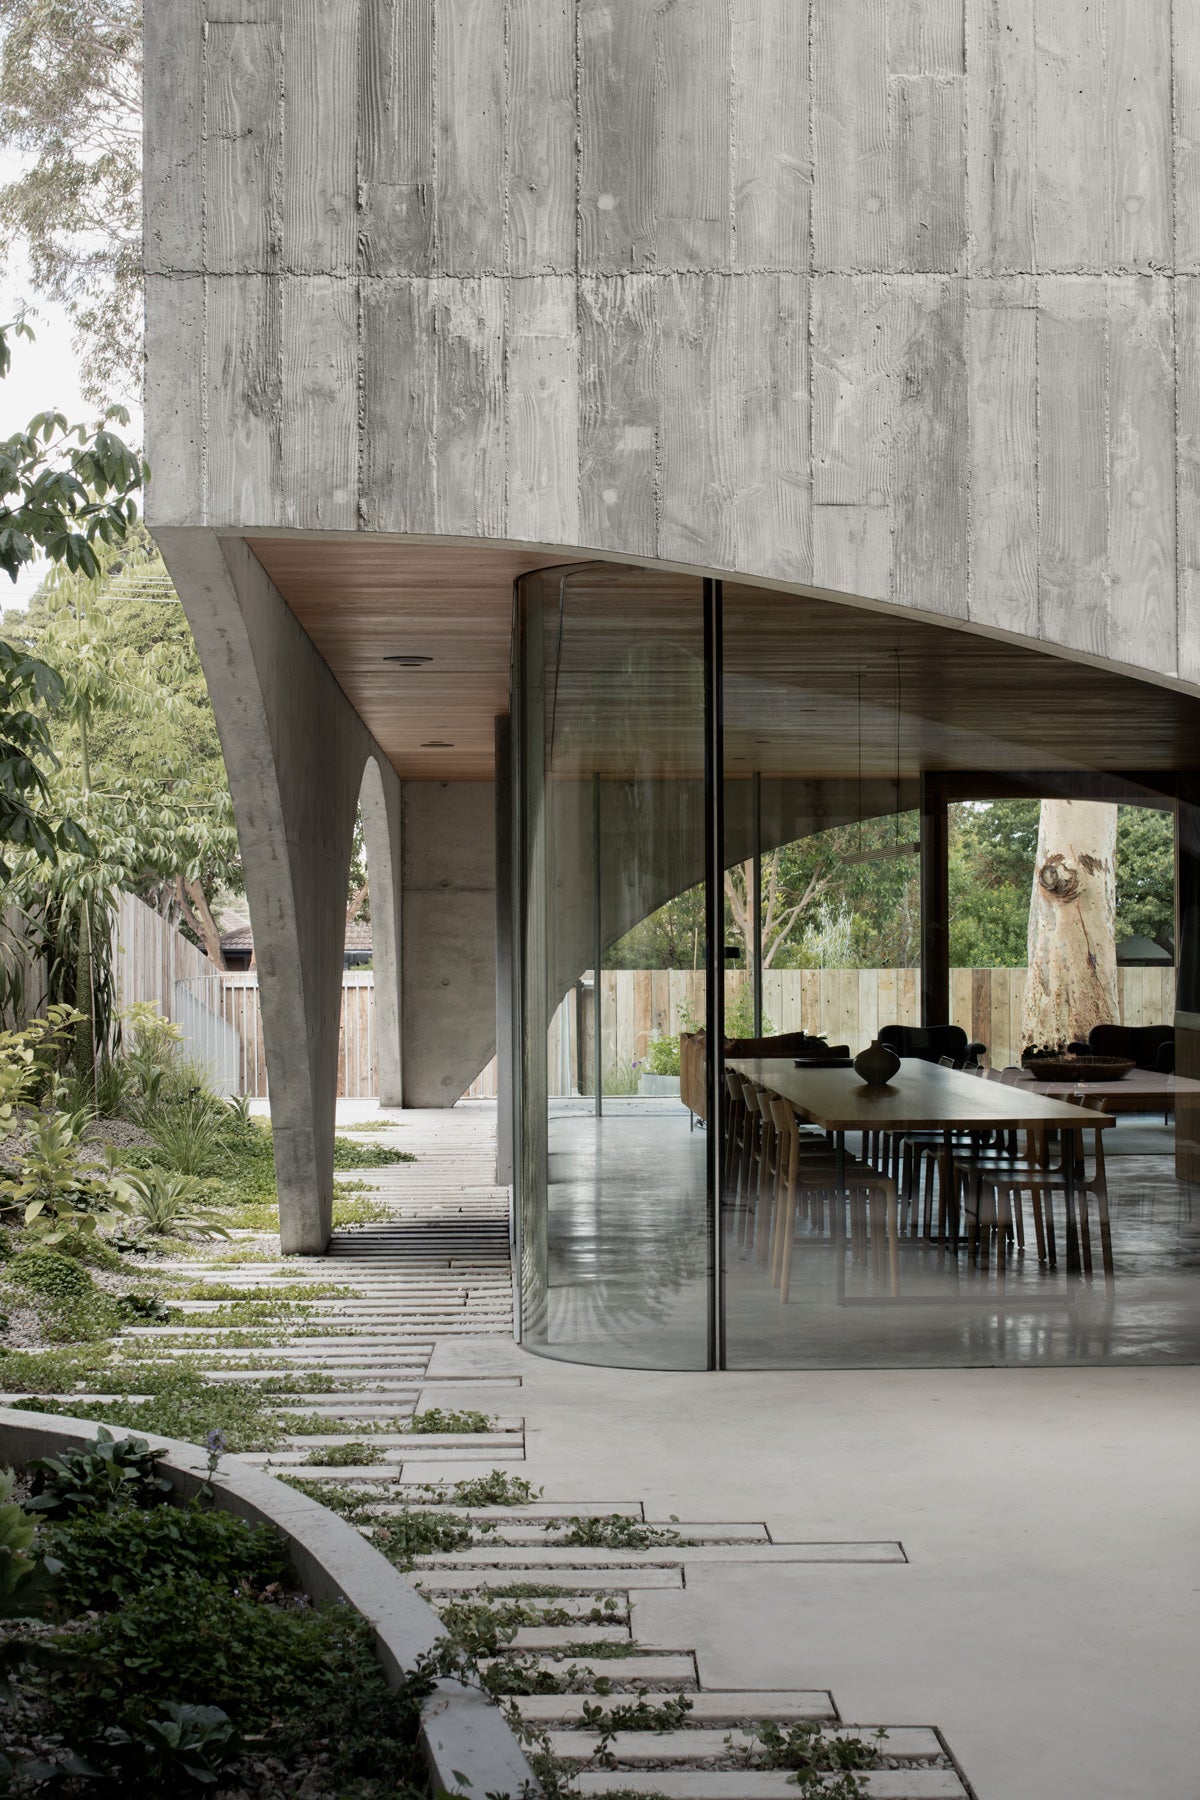 Hawthorn House uses overlapping screens and courtyards to connect with people who live there. Photo: Ben Hosking